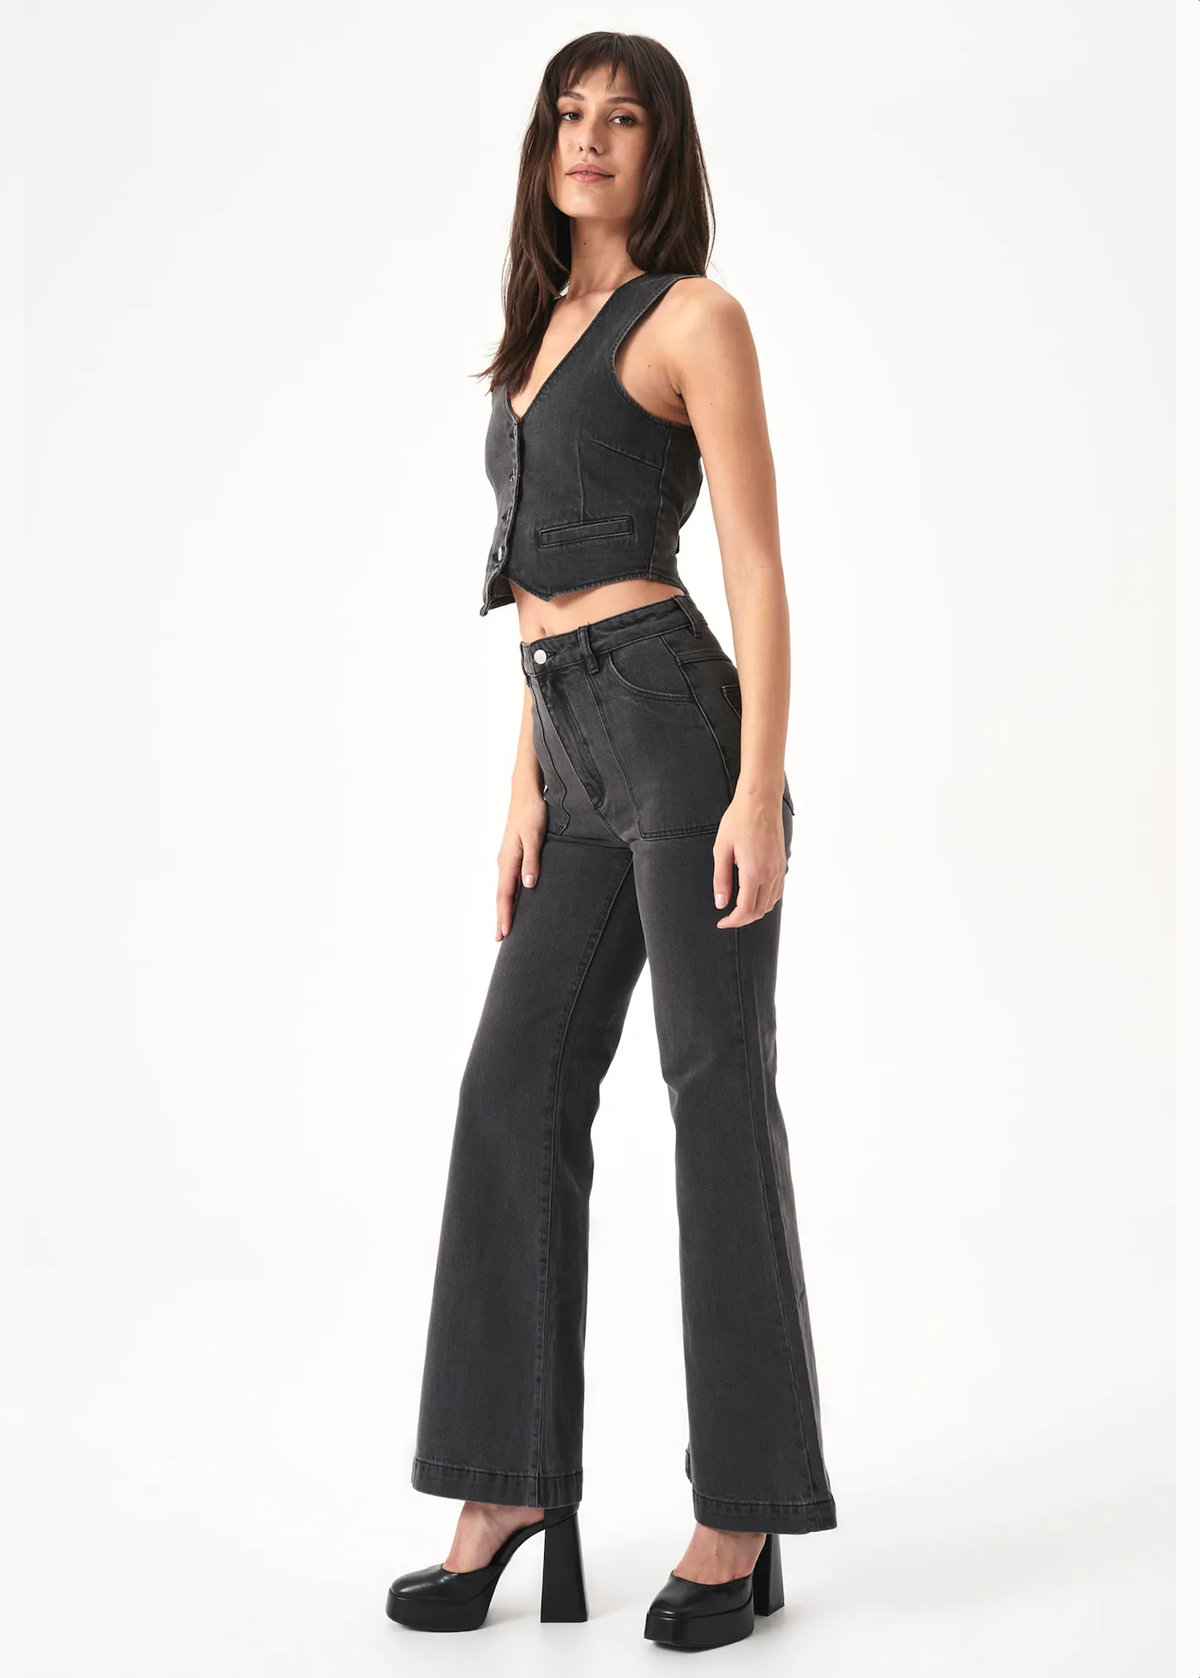 70s inspired faded Brad Black High Rise Waist Stretch Denim Eastcoast flares by Rolla's Jeans